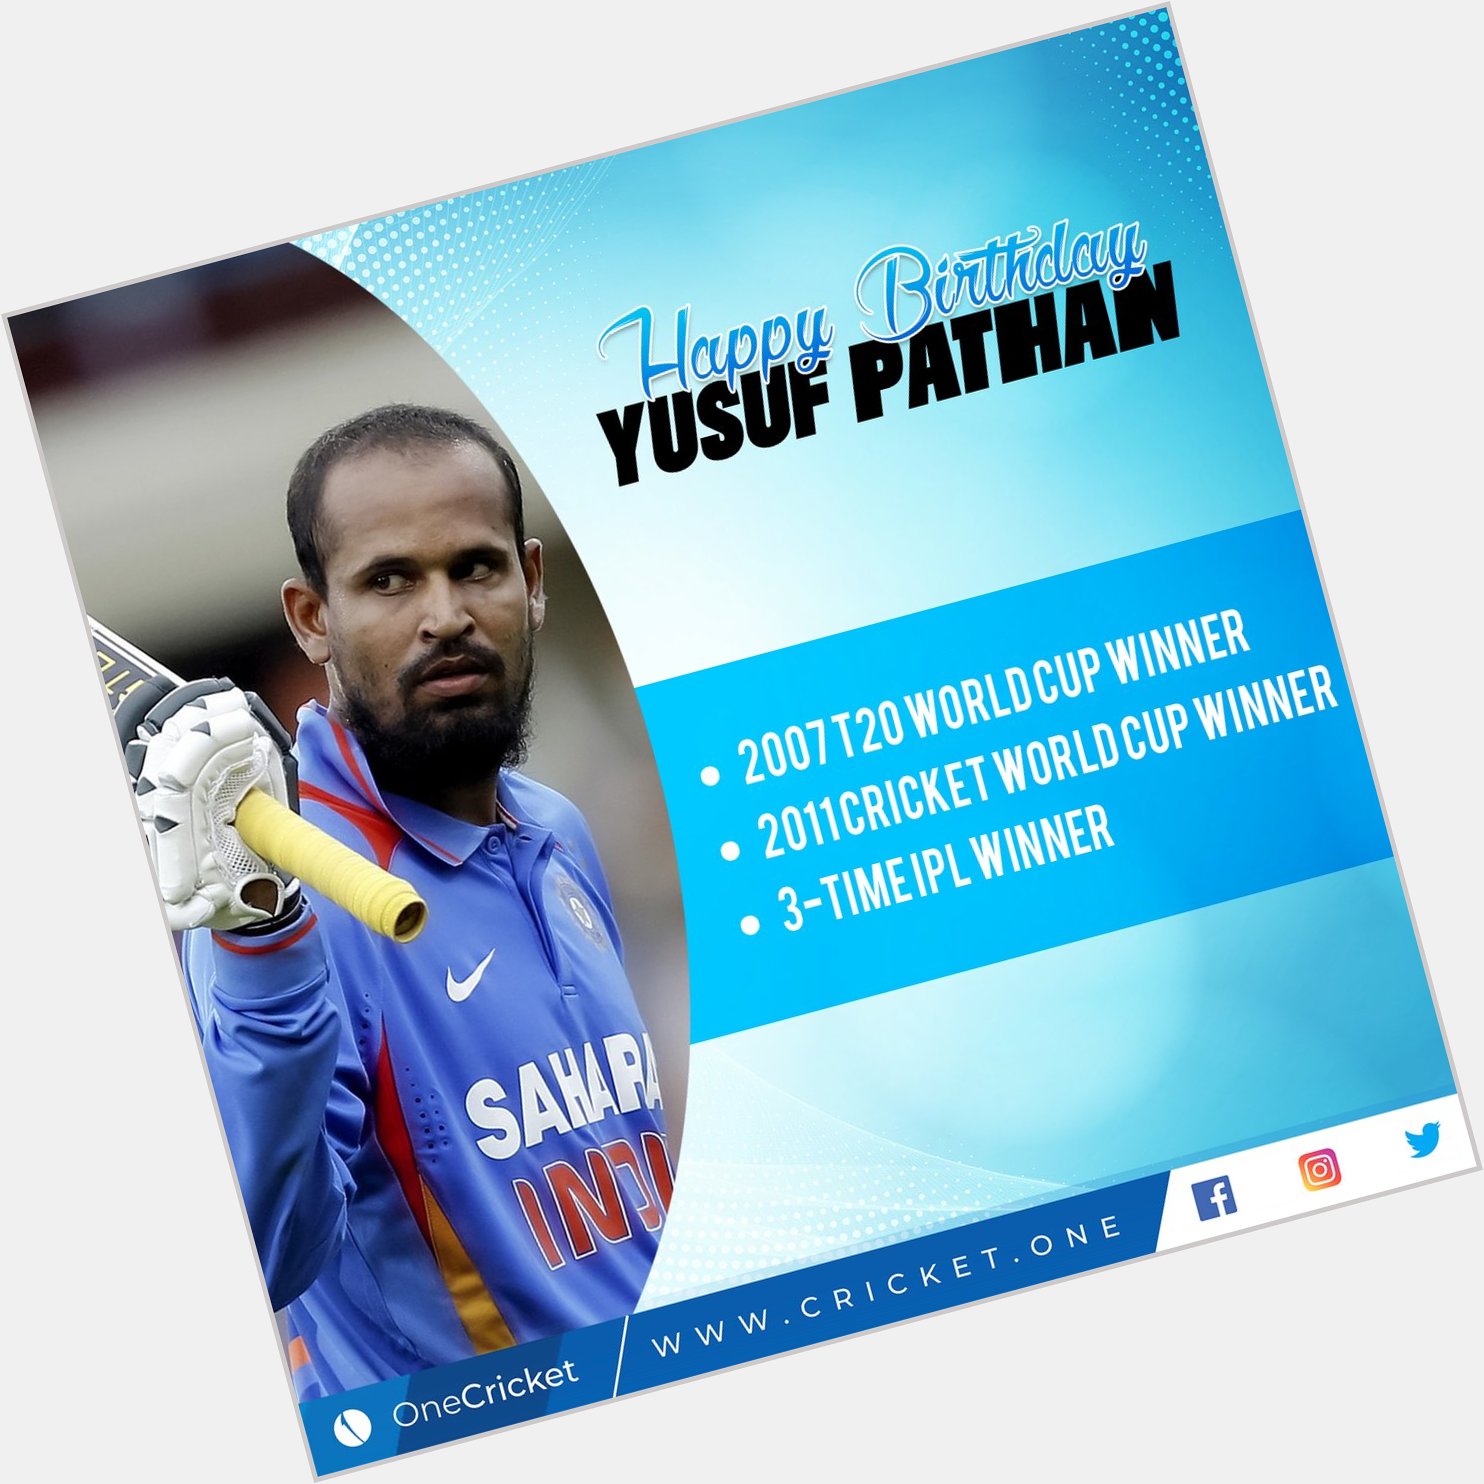 Happy birthday to one of the big hitters of his time - Yusuf Pathan!   